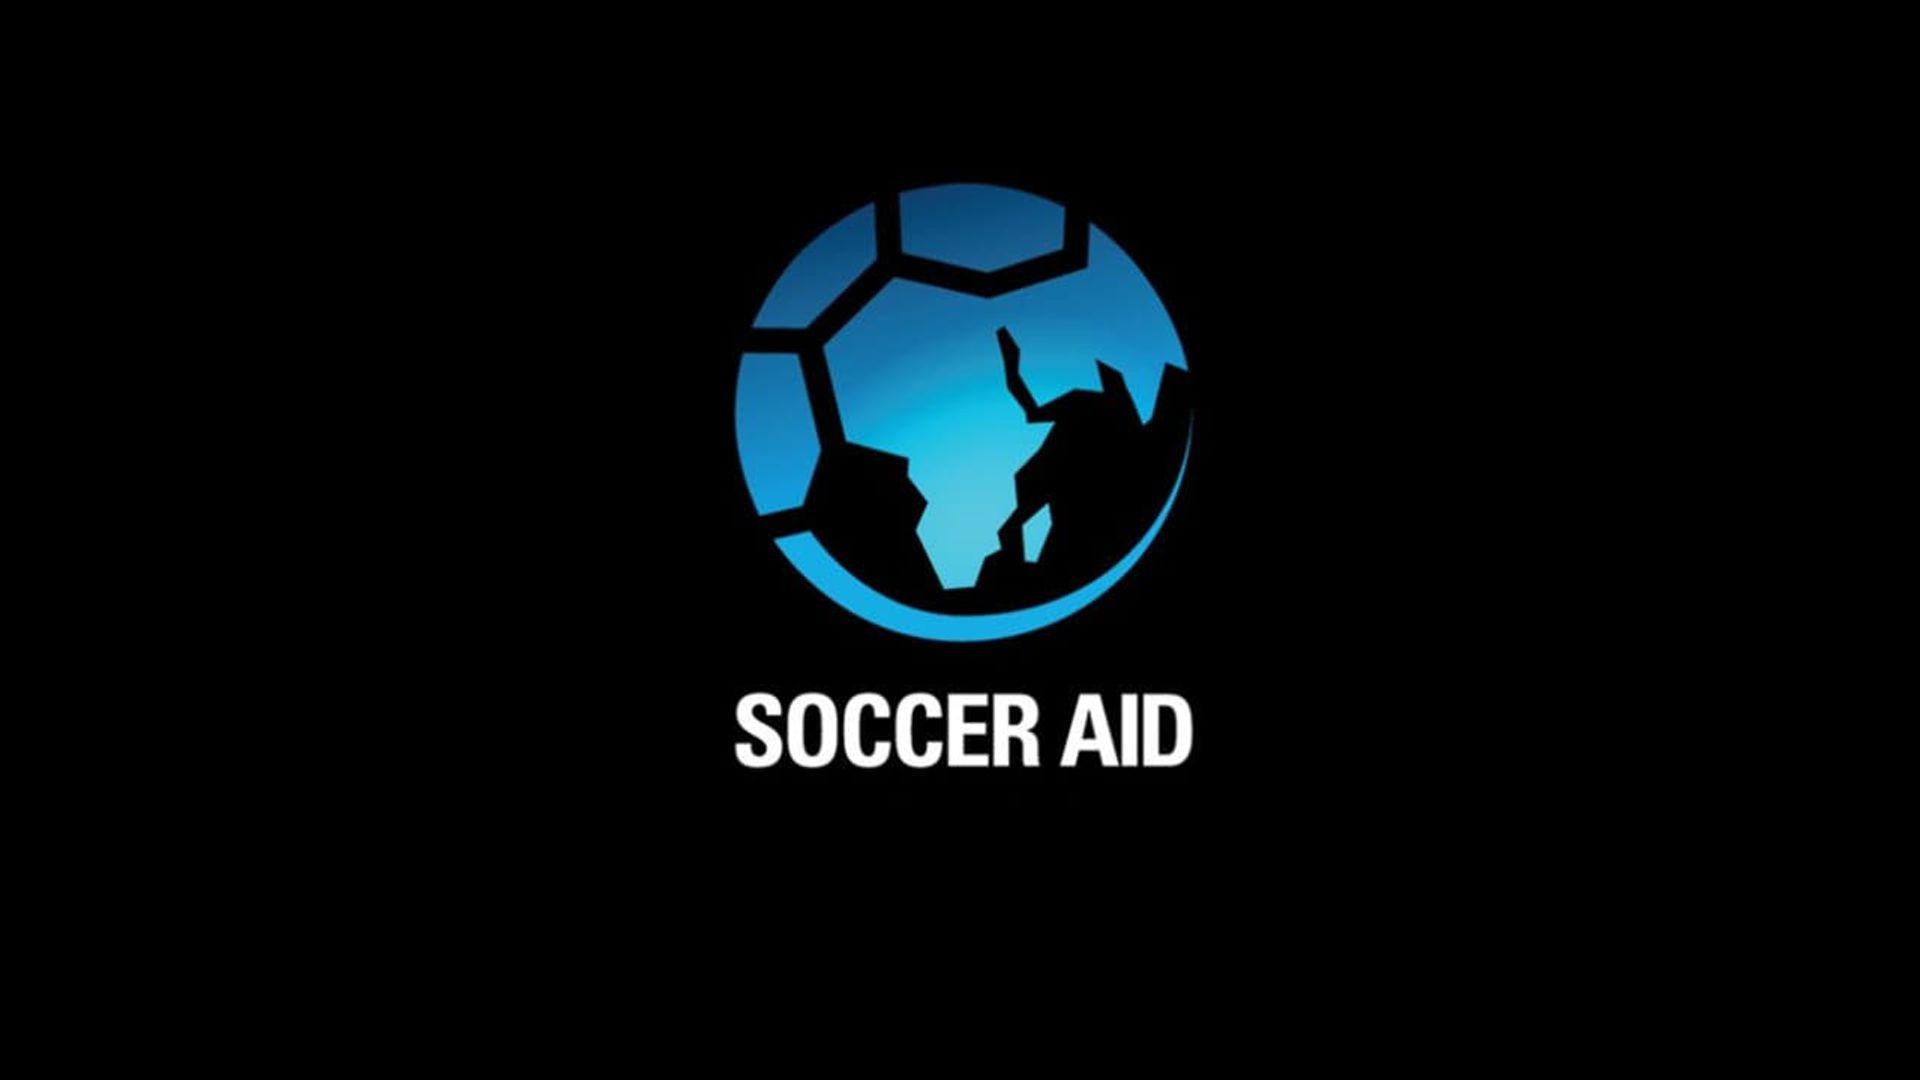 Soccer Aid background